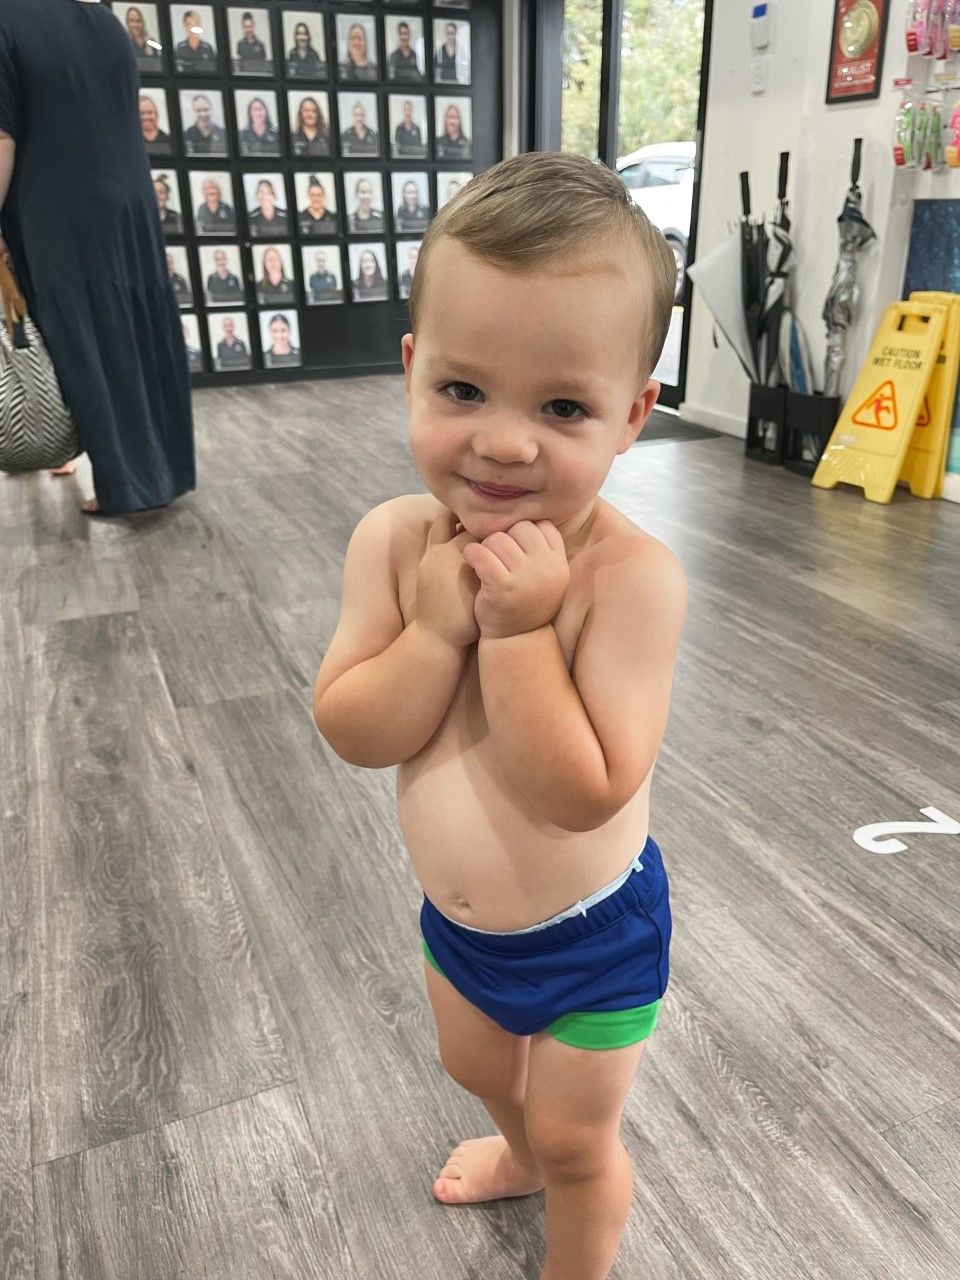 A little boy without a shirt is standing in a room.